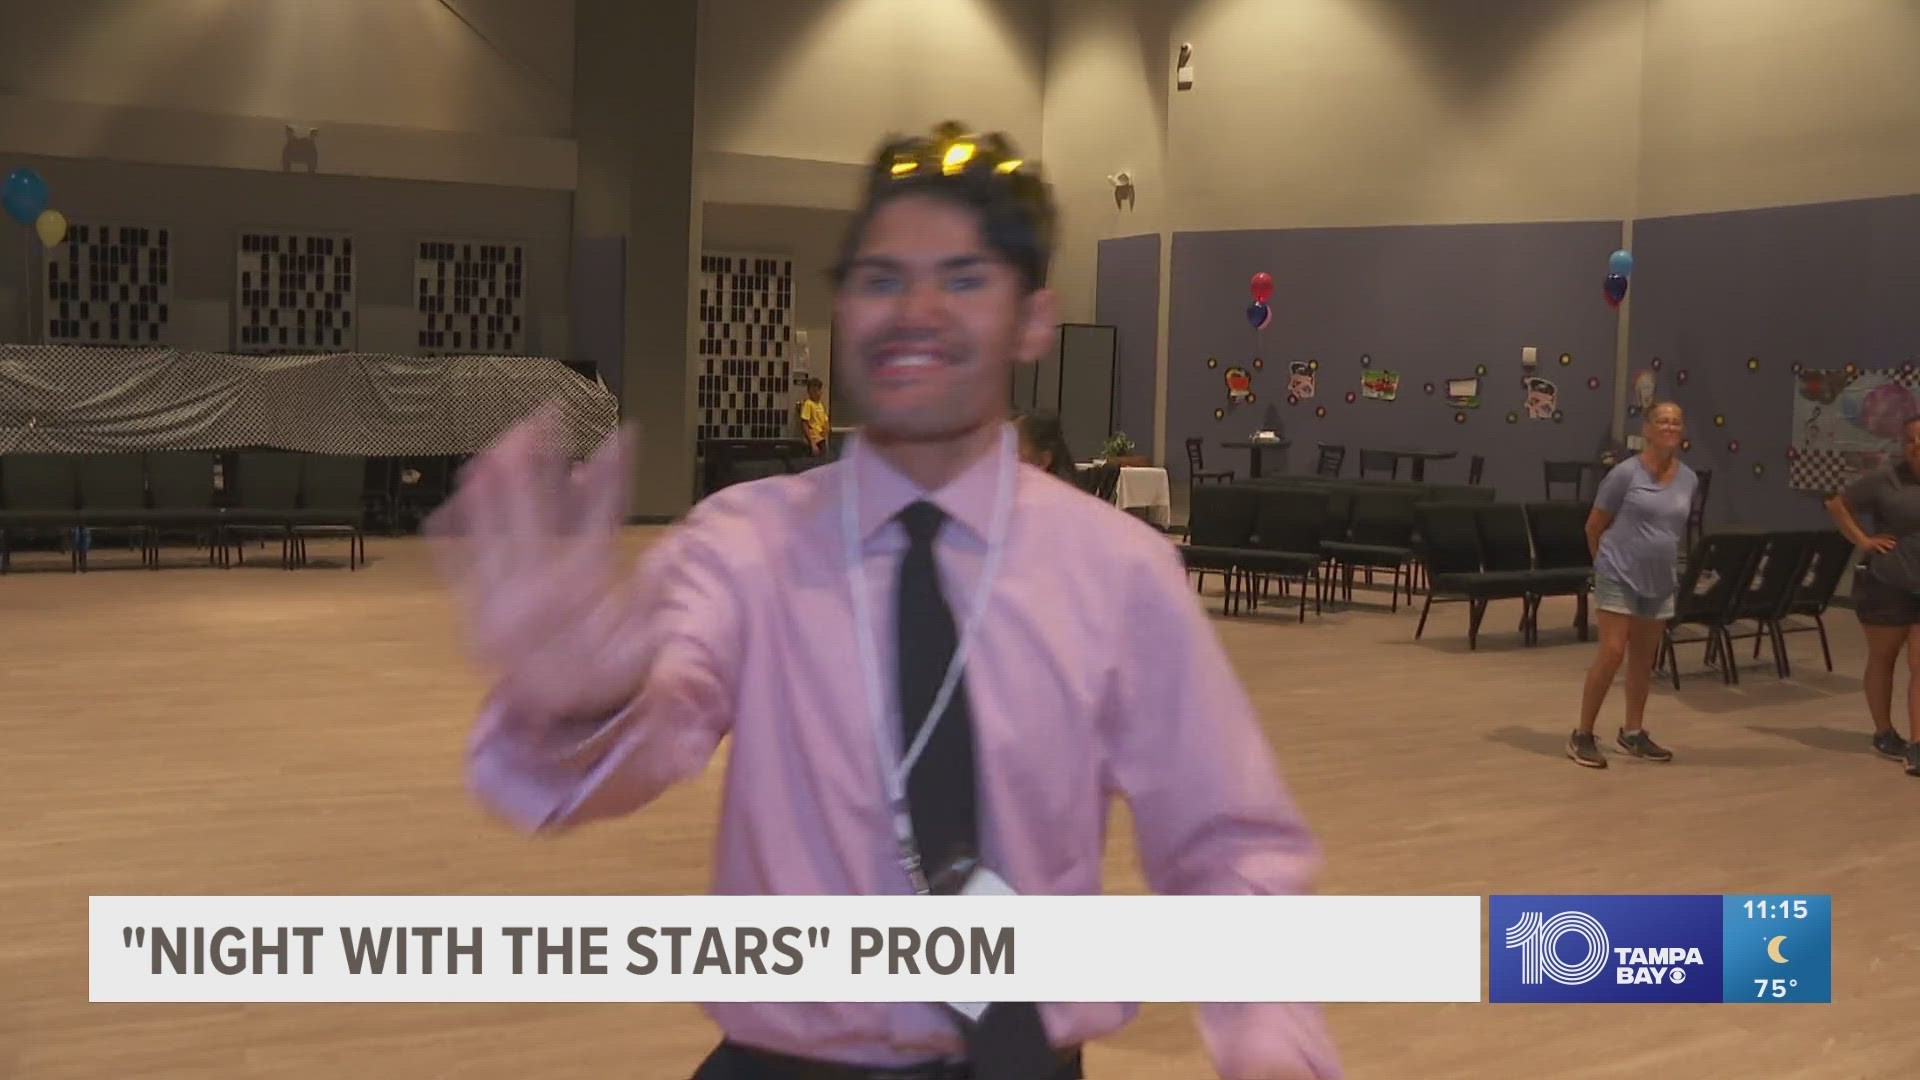 This was the 13th year for the "Night with the Stars" prom.